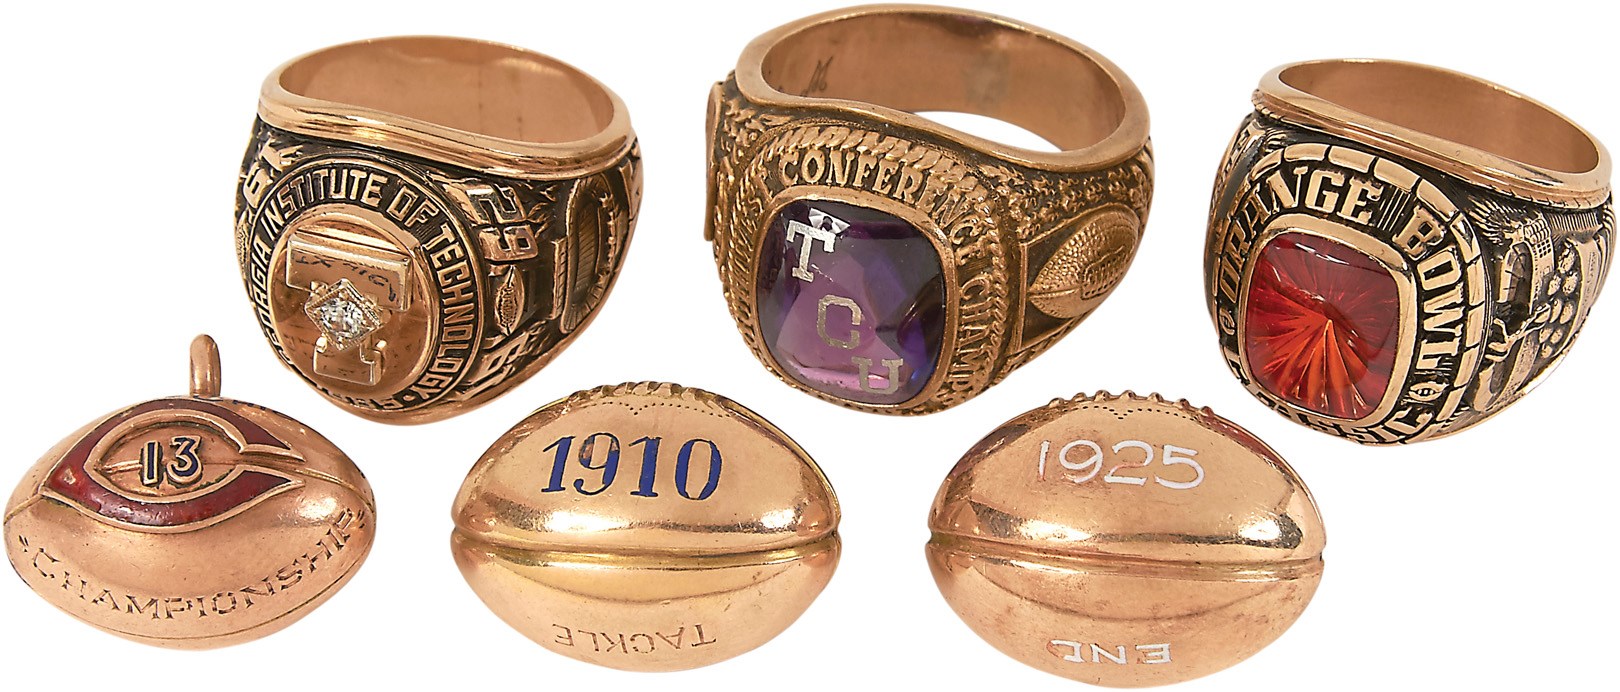 Sports Rings And Awards - 1910-80s College Football Bowl and Championship Rings & Pendants (6)